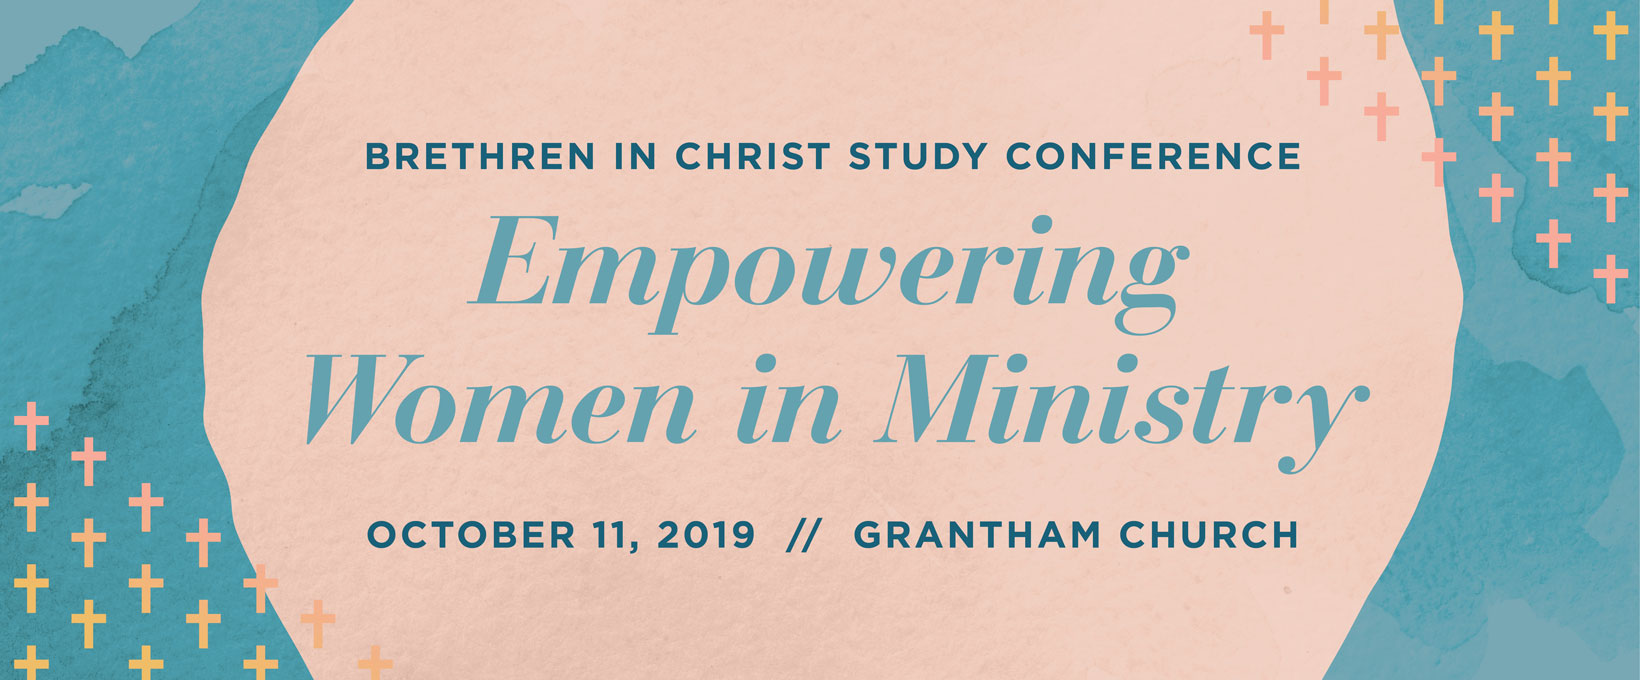 Banner advertising the 2019 Brethren in Christ Study Conference on "Empowering Women in Ministry," to be held on October 11, 2019 at Grantham Church